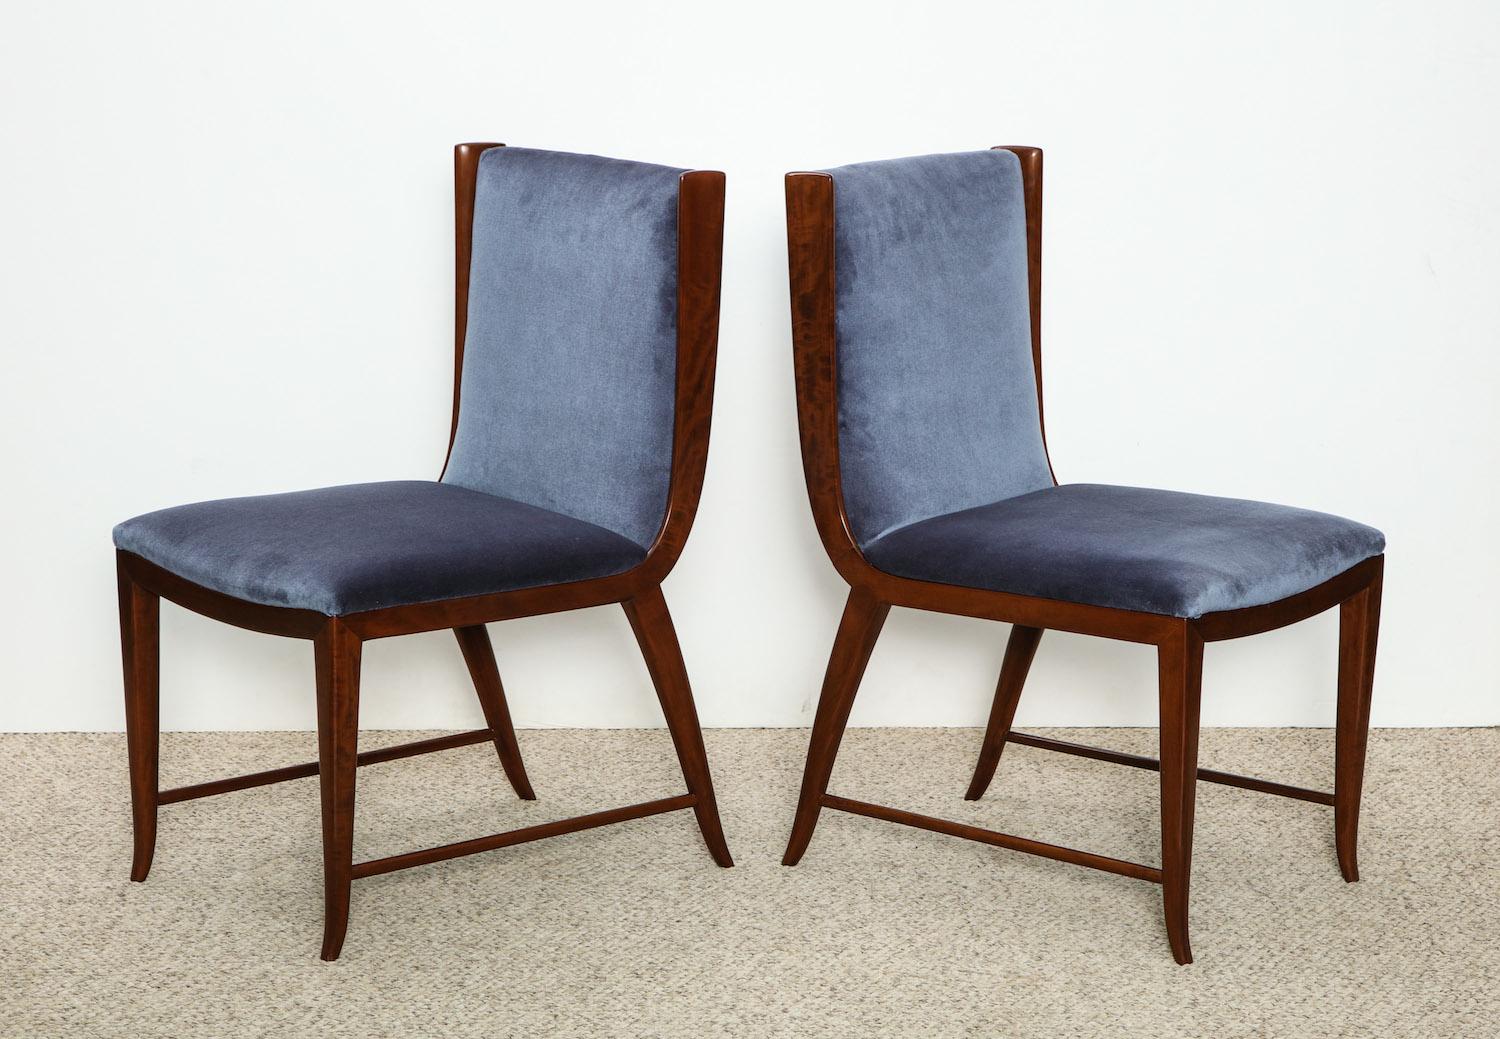 Stylized wood frames with upholstered seats and backs. An elegant and rare form.